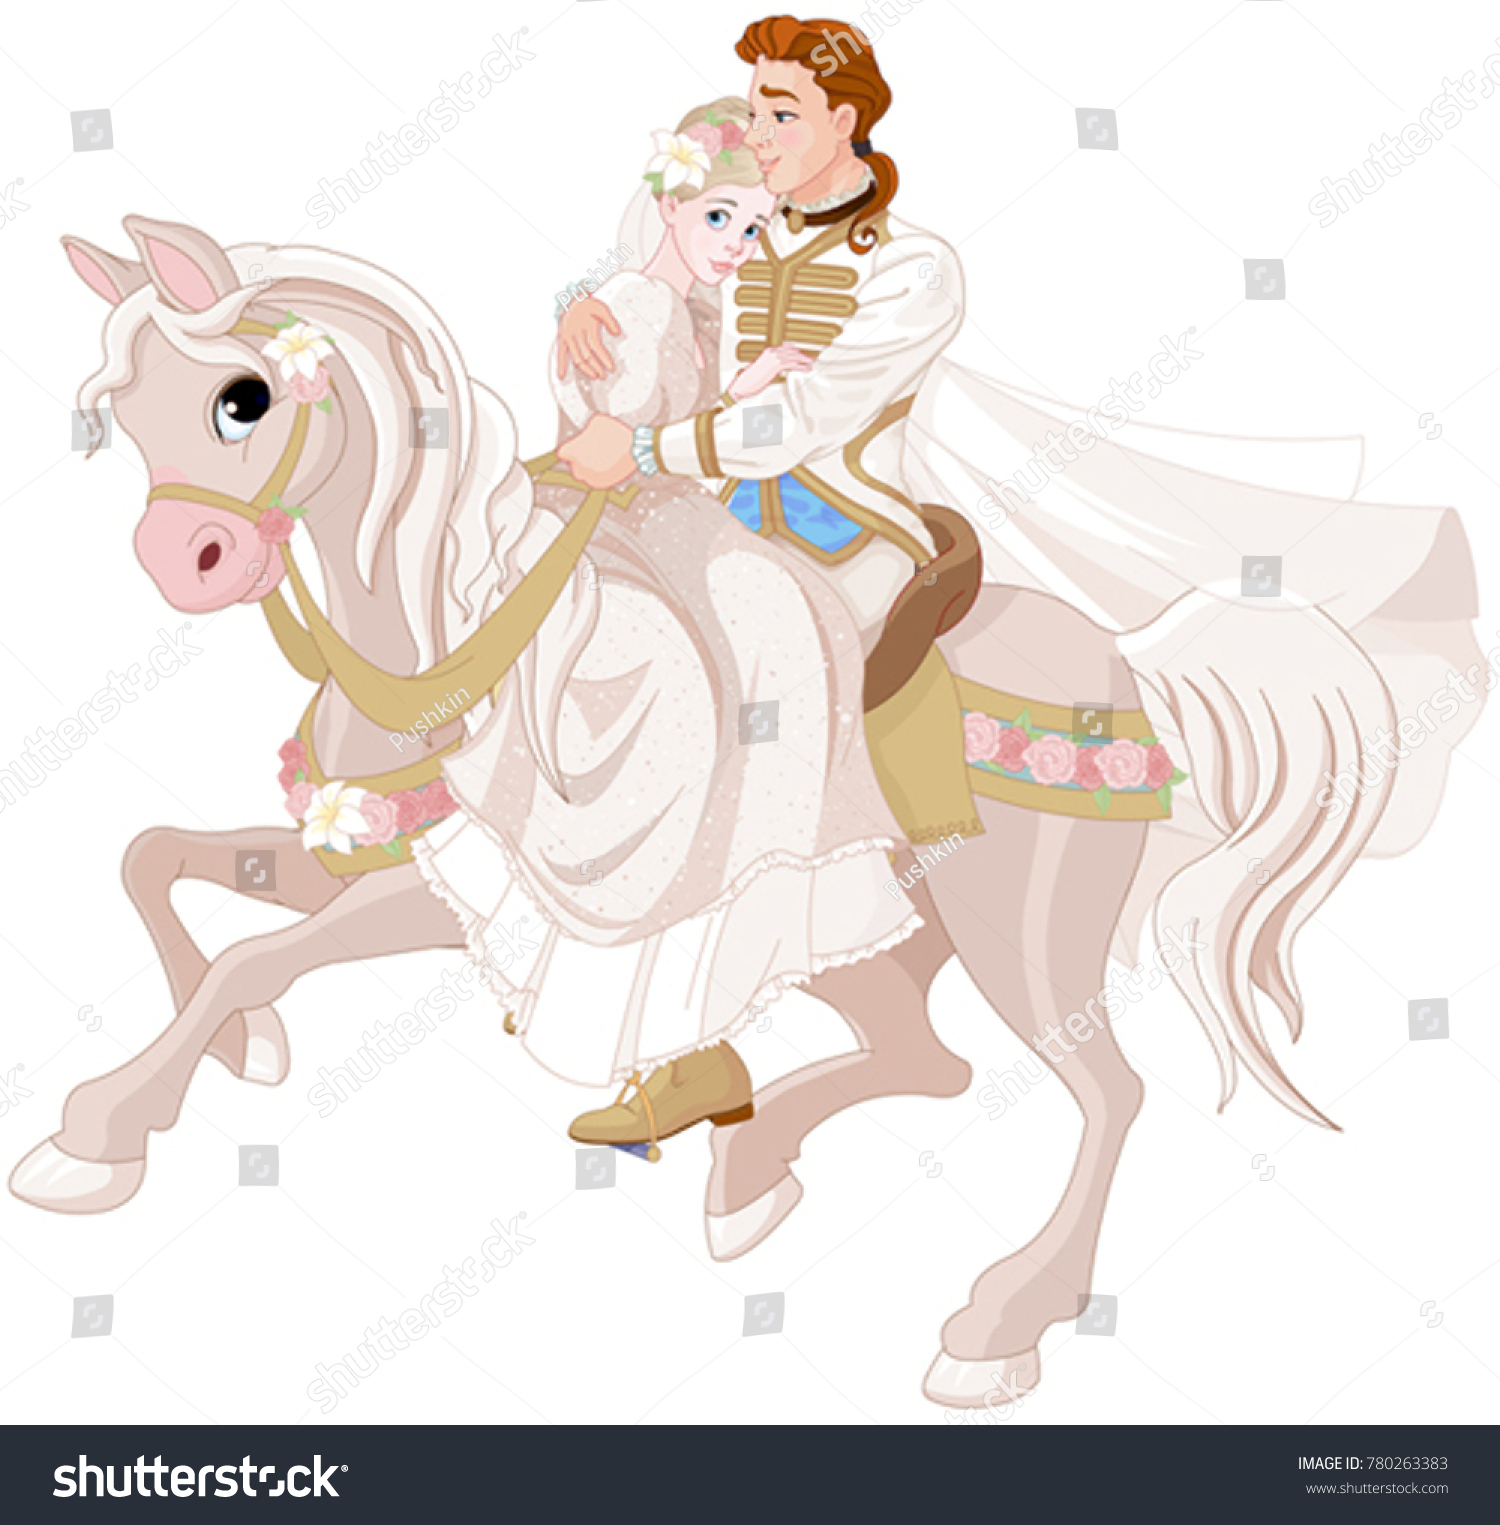 SVG of  Illustration of Cinderella and Prince riding a horse after wedding svg